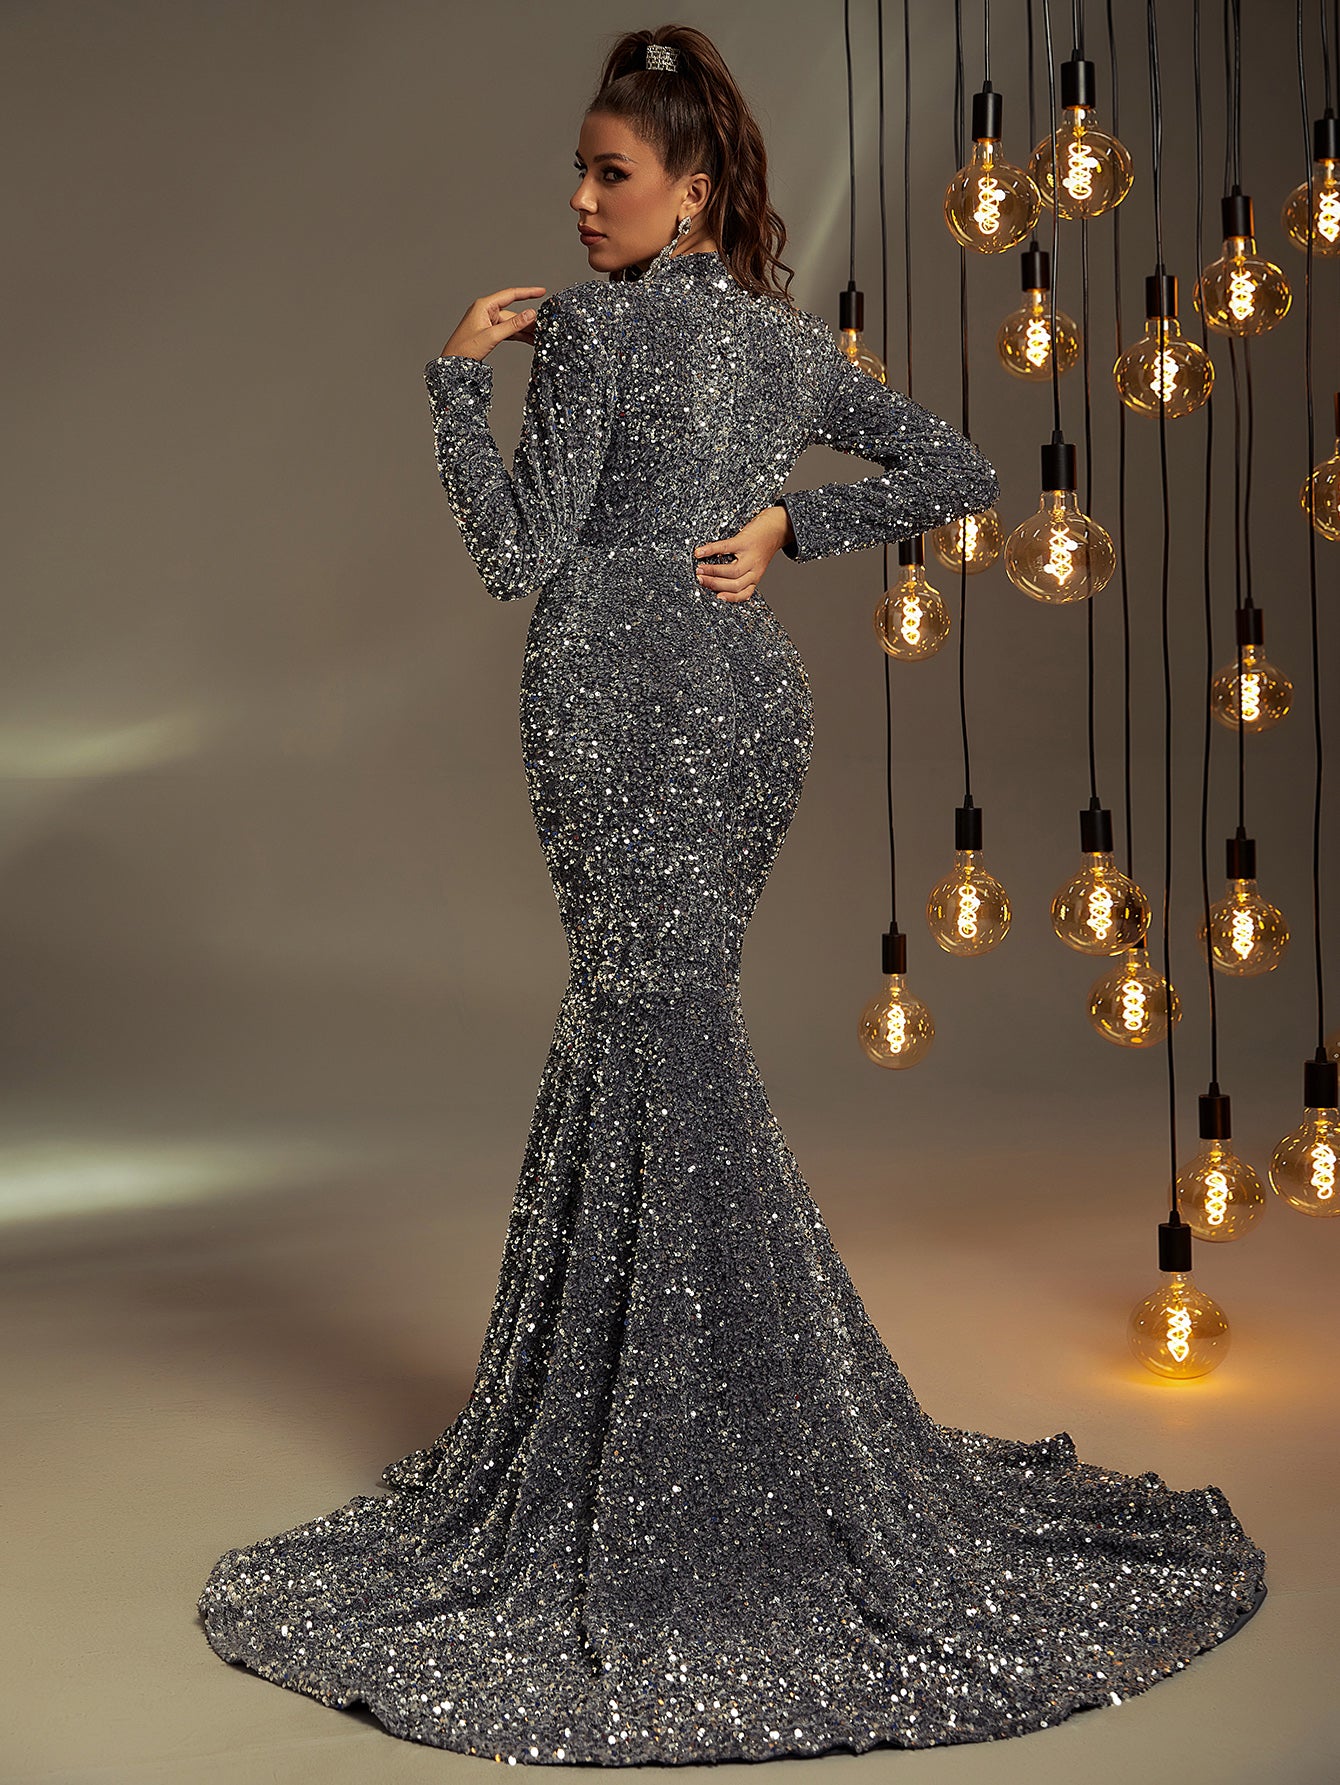 Cut Out Front Long Sleeve Sequin Prom Dress